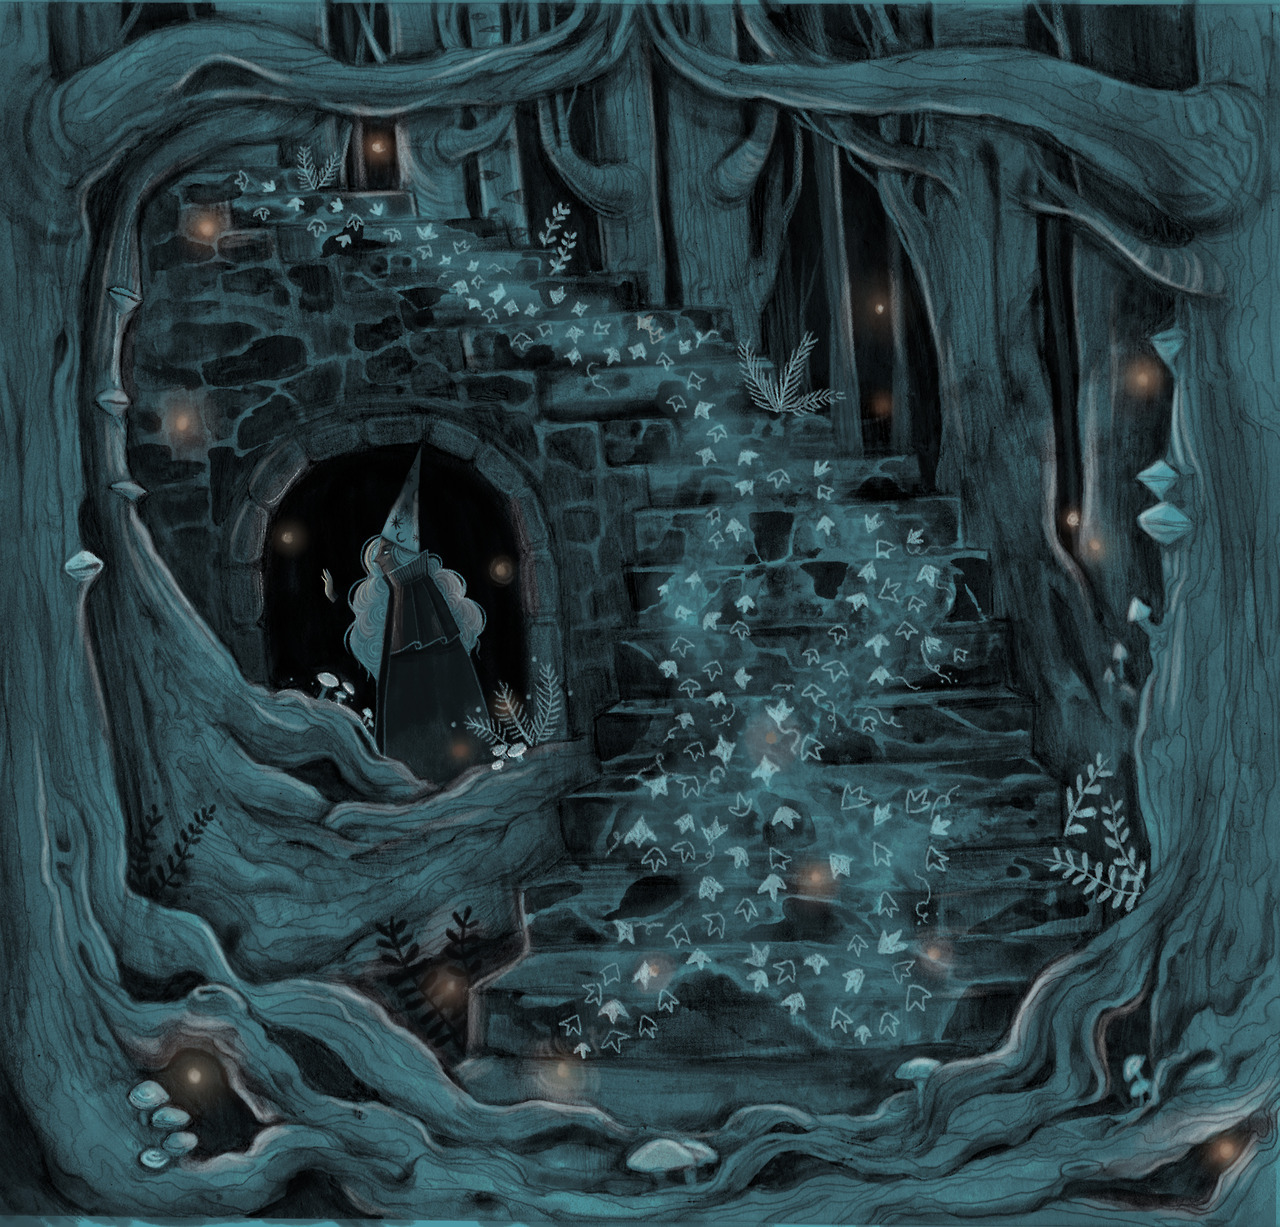 Mysterious glowing orbs and a staircase to nowhere, the forest is beautiful but be careful! “Will O’ the Wisps” is a piece by Eden Cooke, who you can find on her tumblr or instagram — Immediately post your art to a topic and get feedback. Join our...